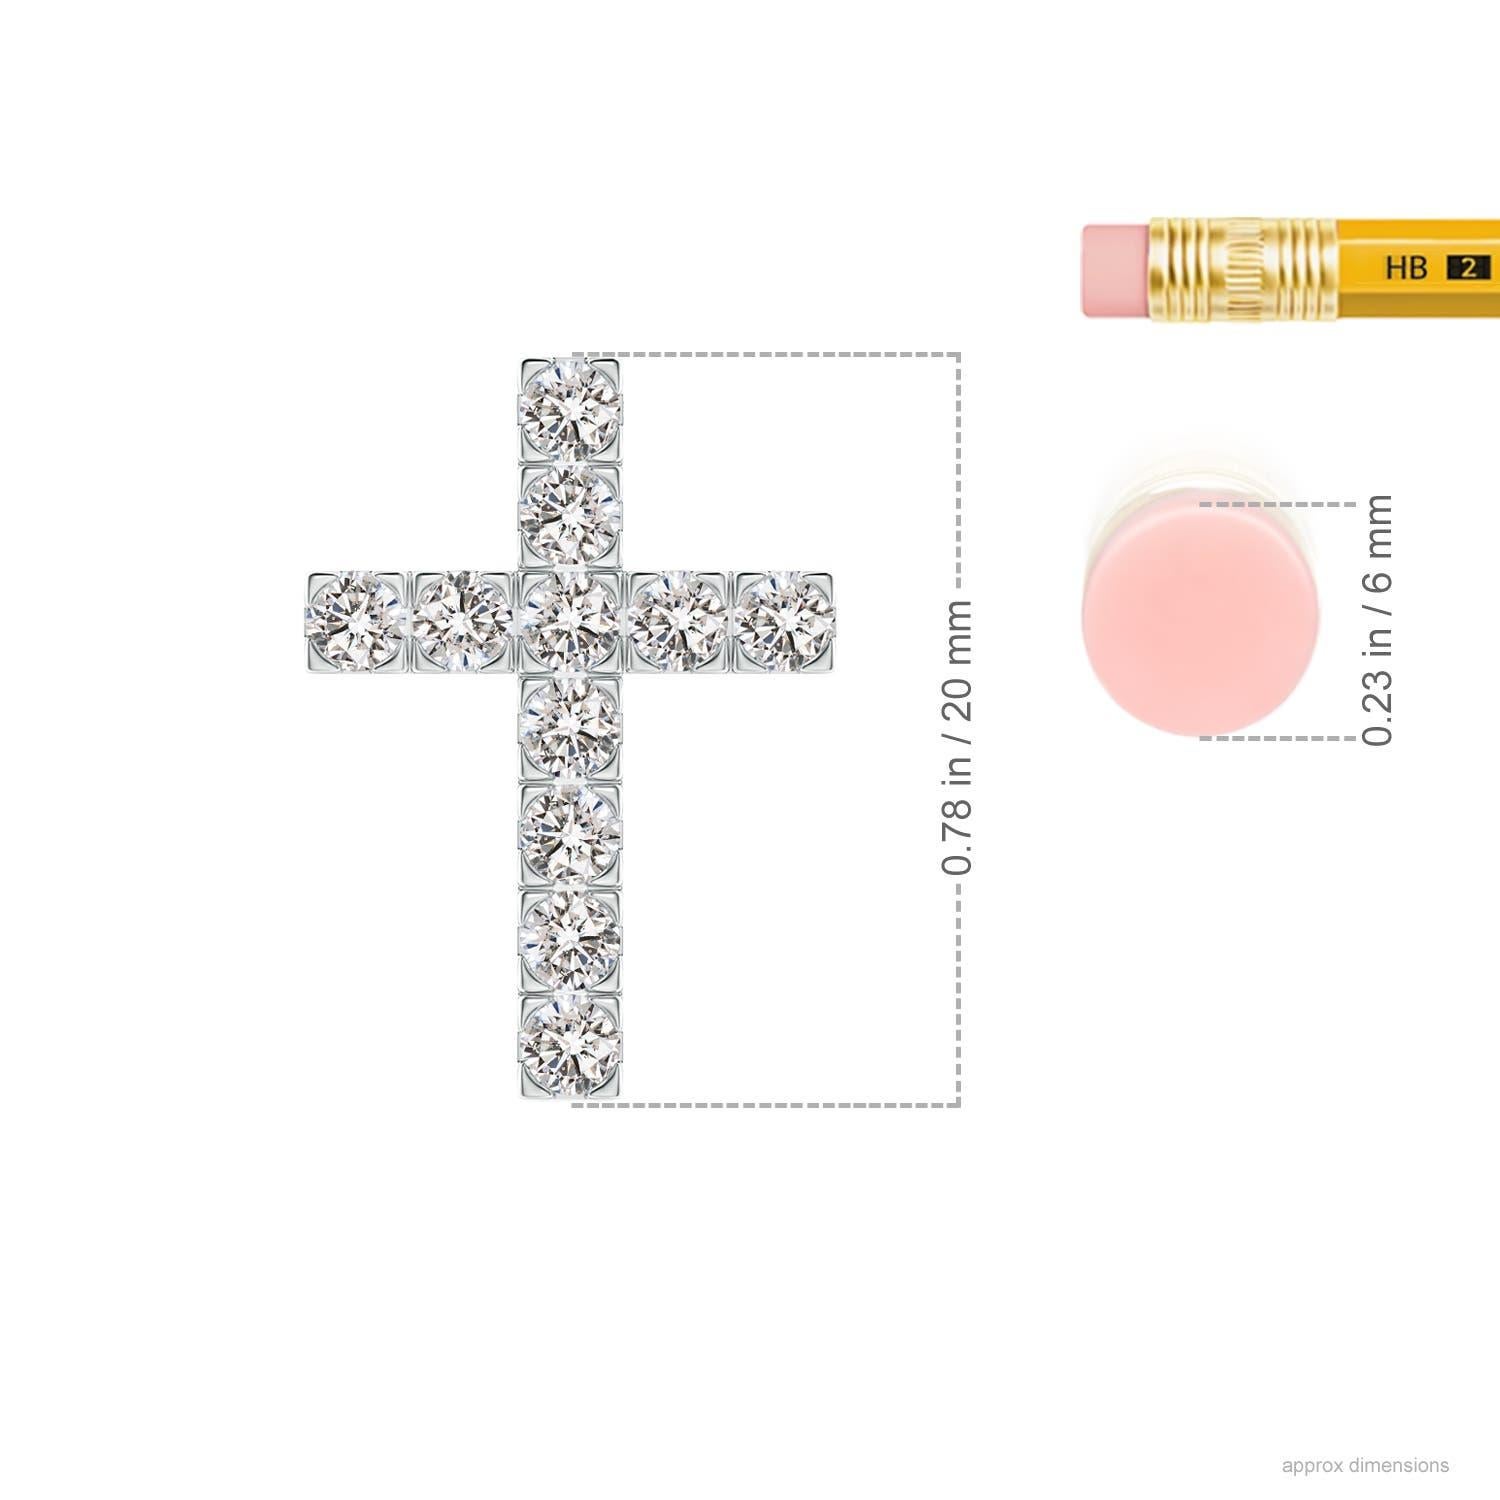 This platinum cross pendant is a traditional symbol of faith and belief. The brilliant diamonds held in flat prong settings, square off the edges for a sophisticated look.
Diamond is the Birthstone for April and traditional gift for 10th wedding